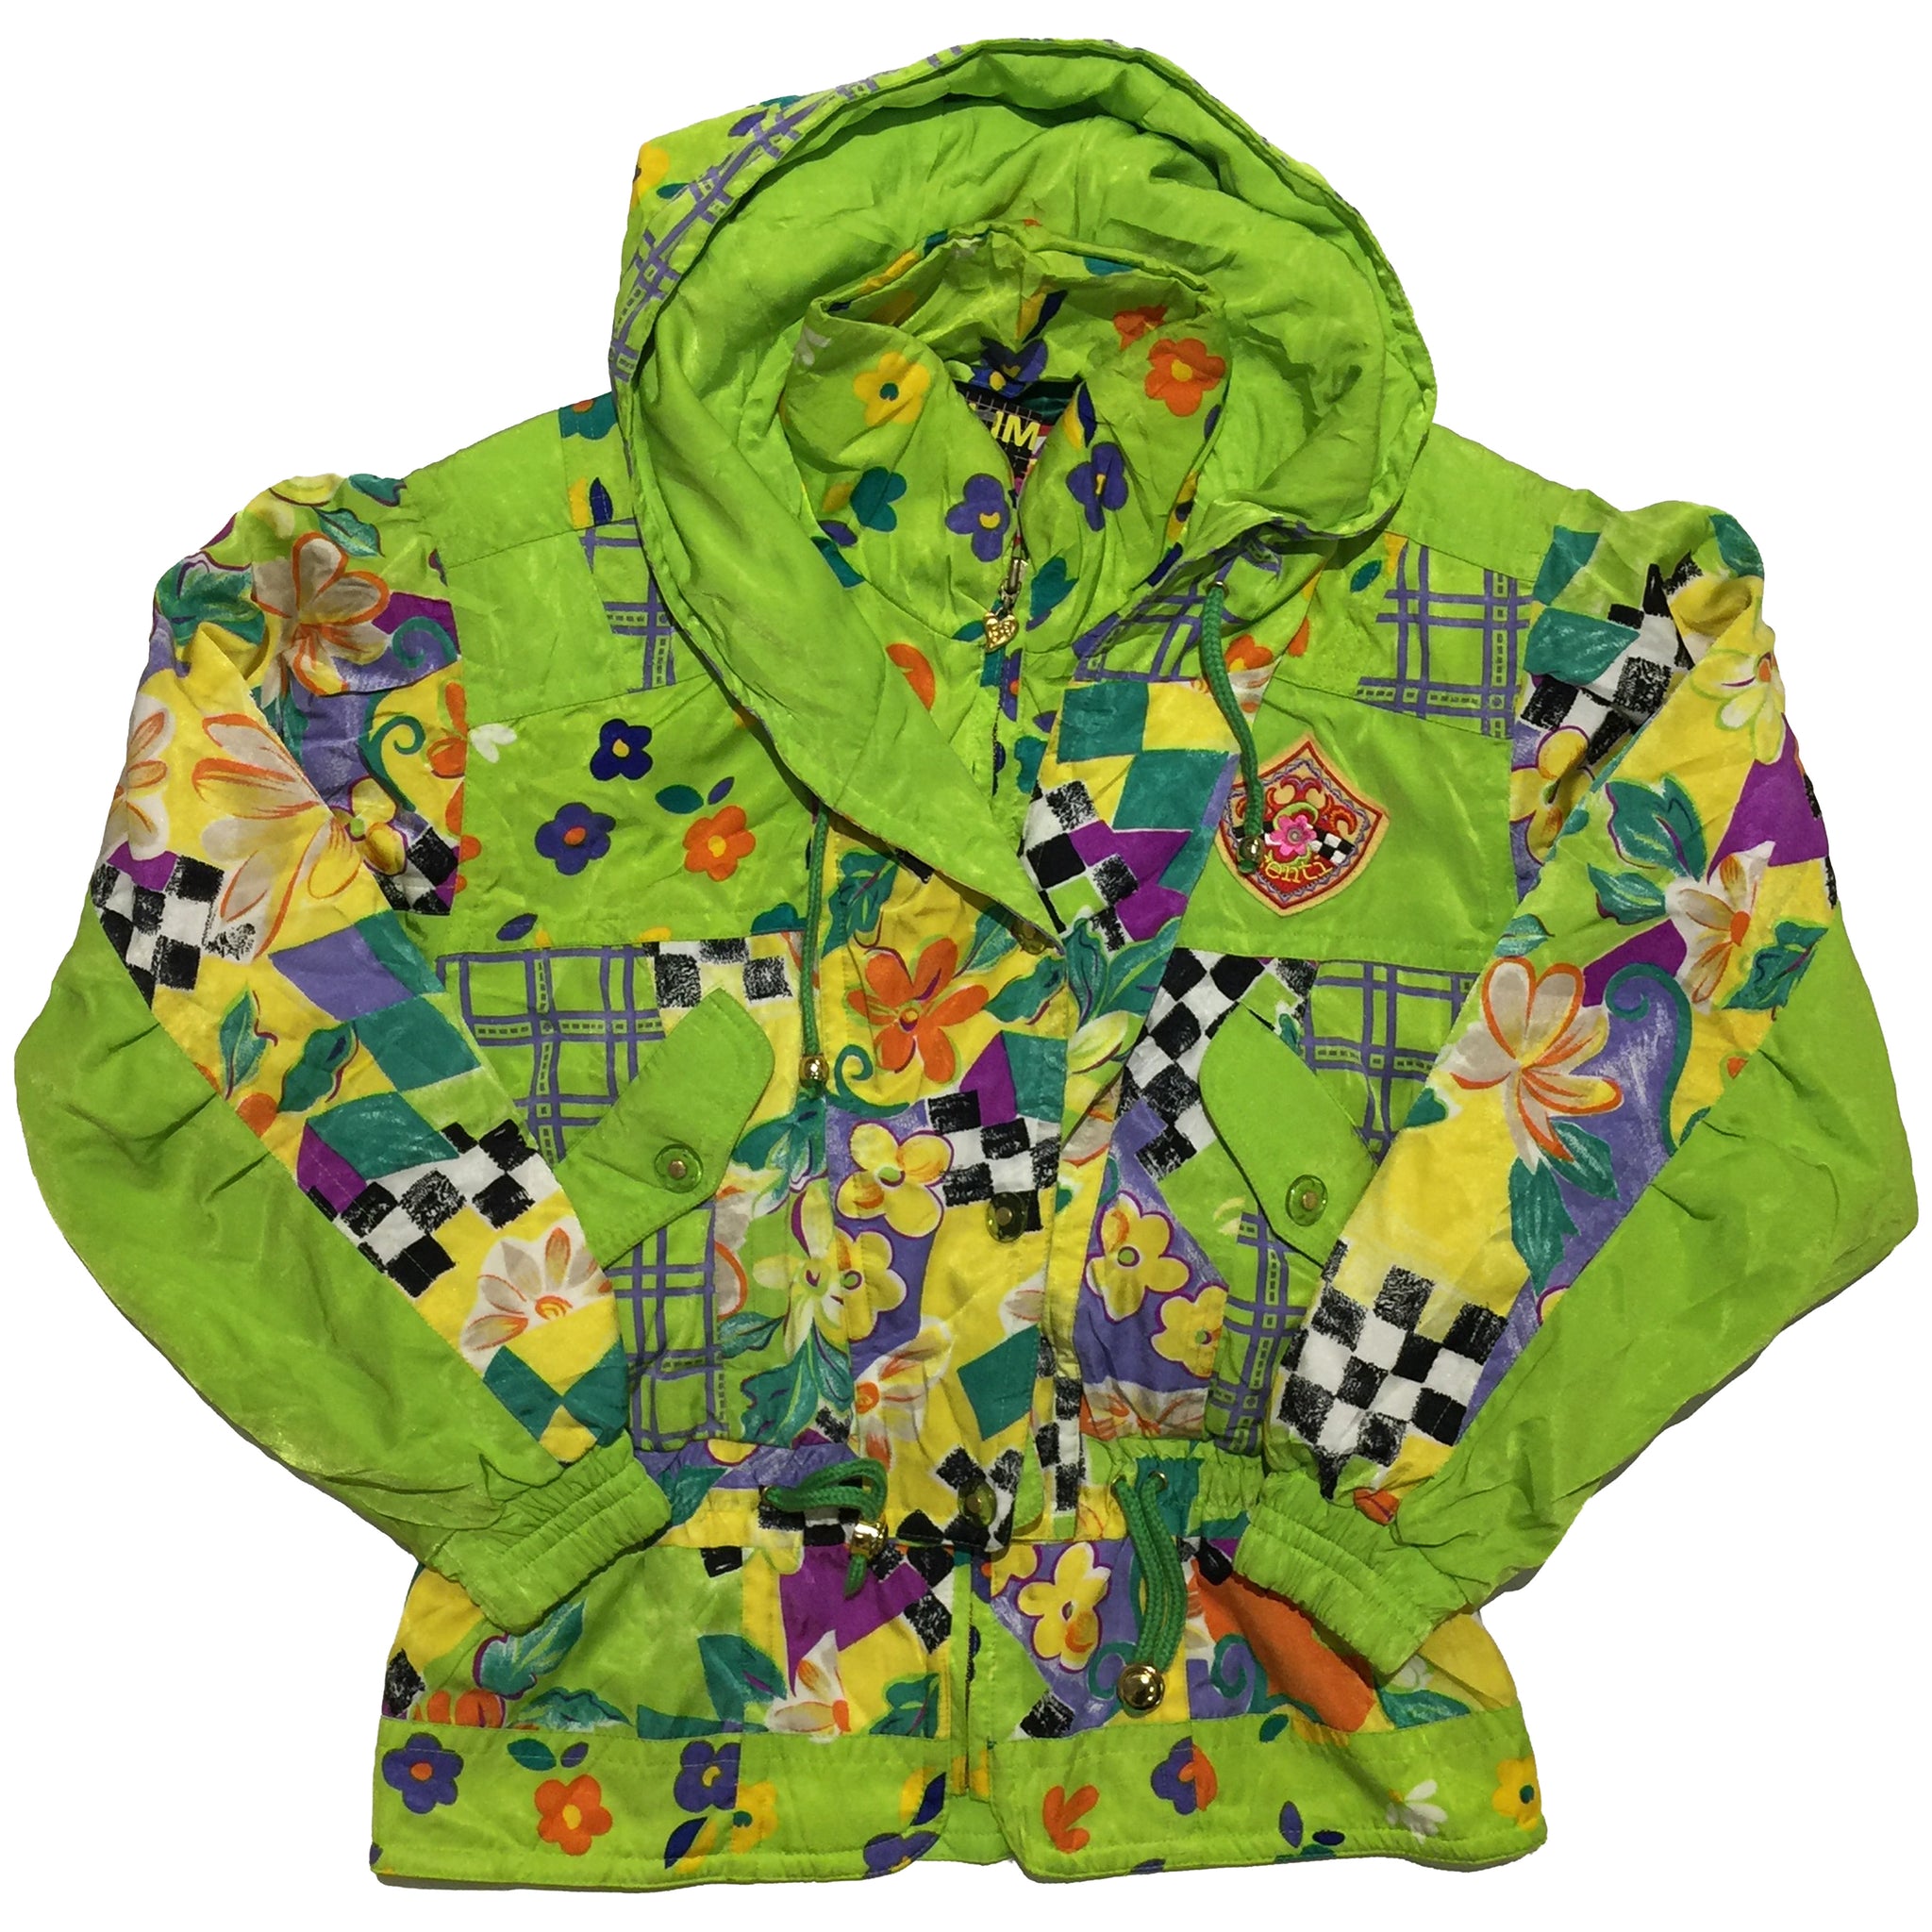 Senti Green, Floral, and Checkered Jacket